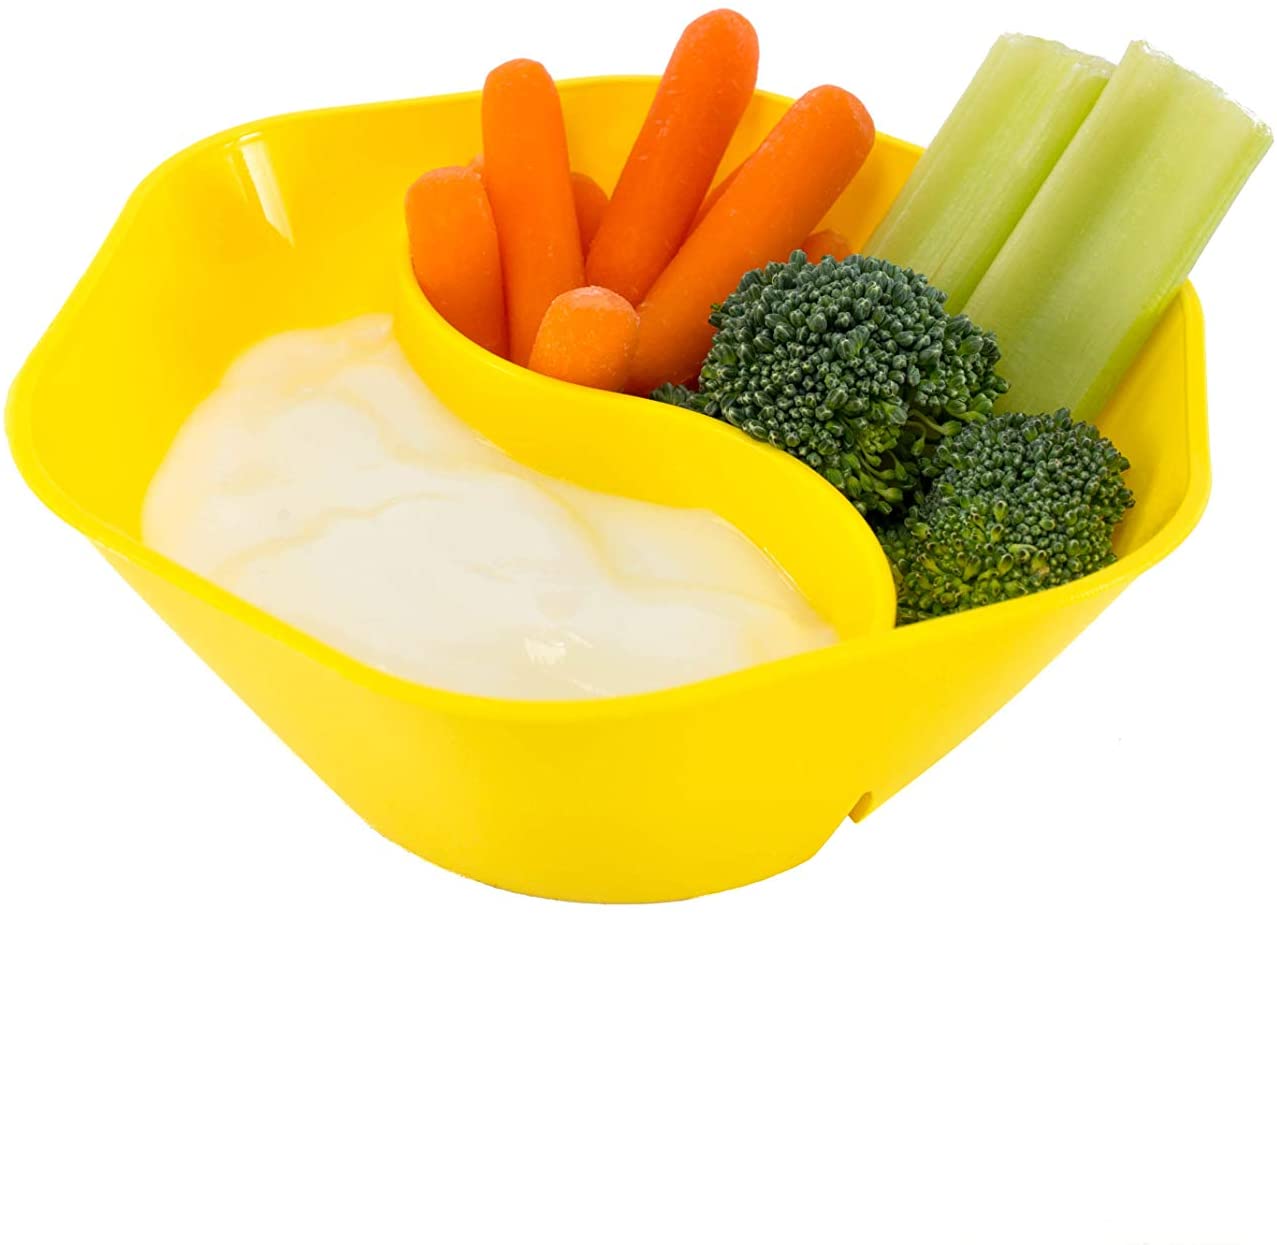 yellow fiesta double dipping bowl displayed with vegetables and dip on a white background